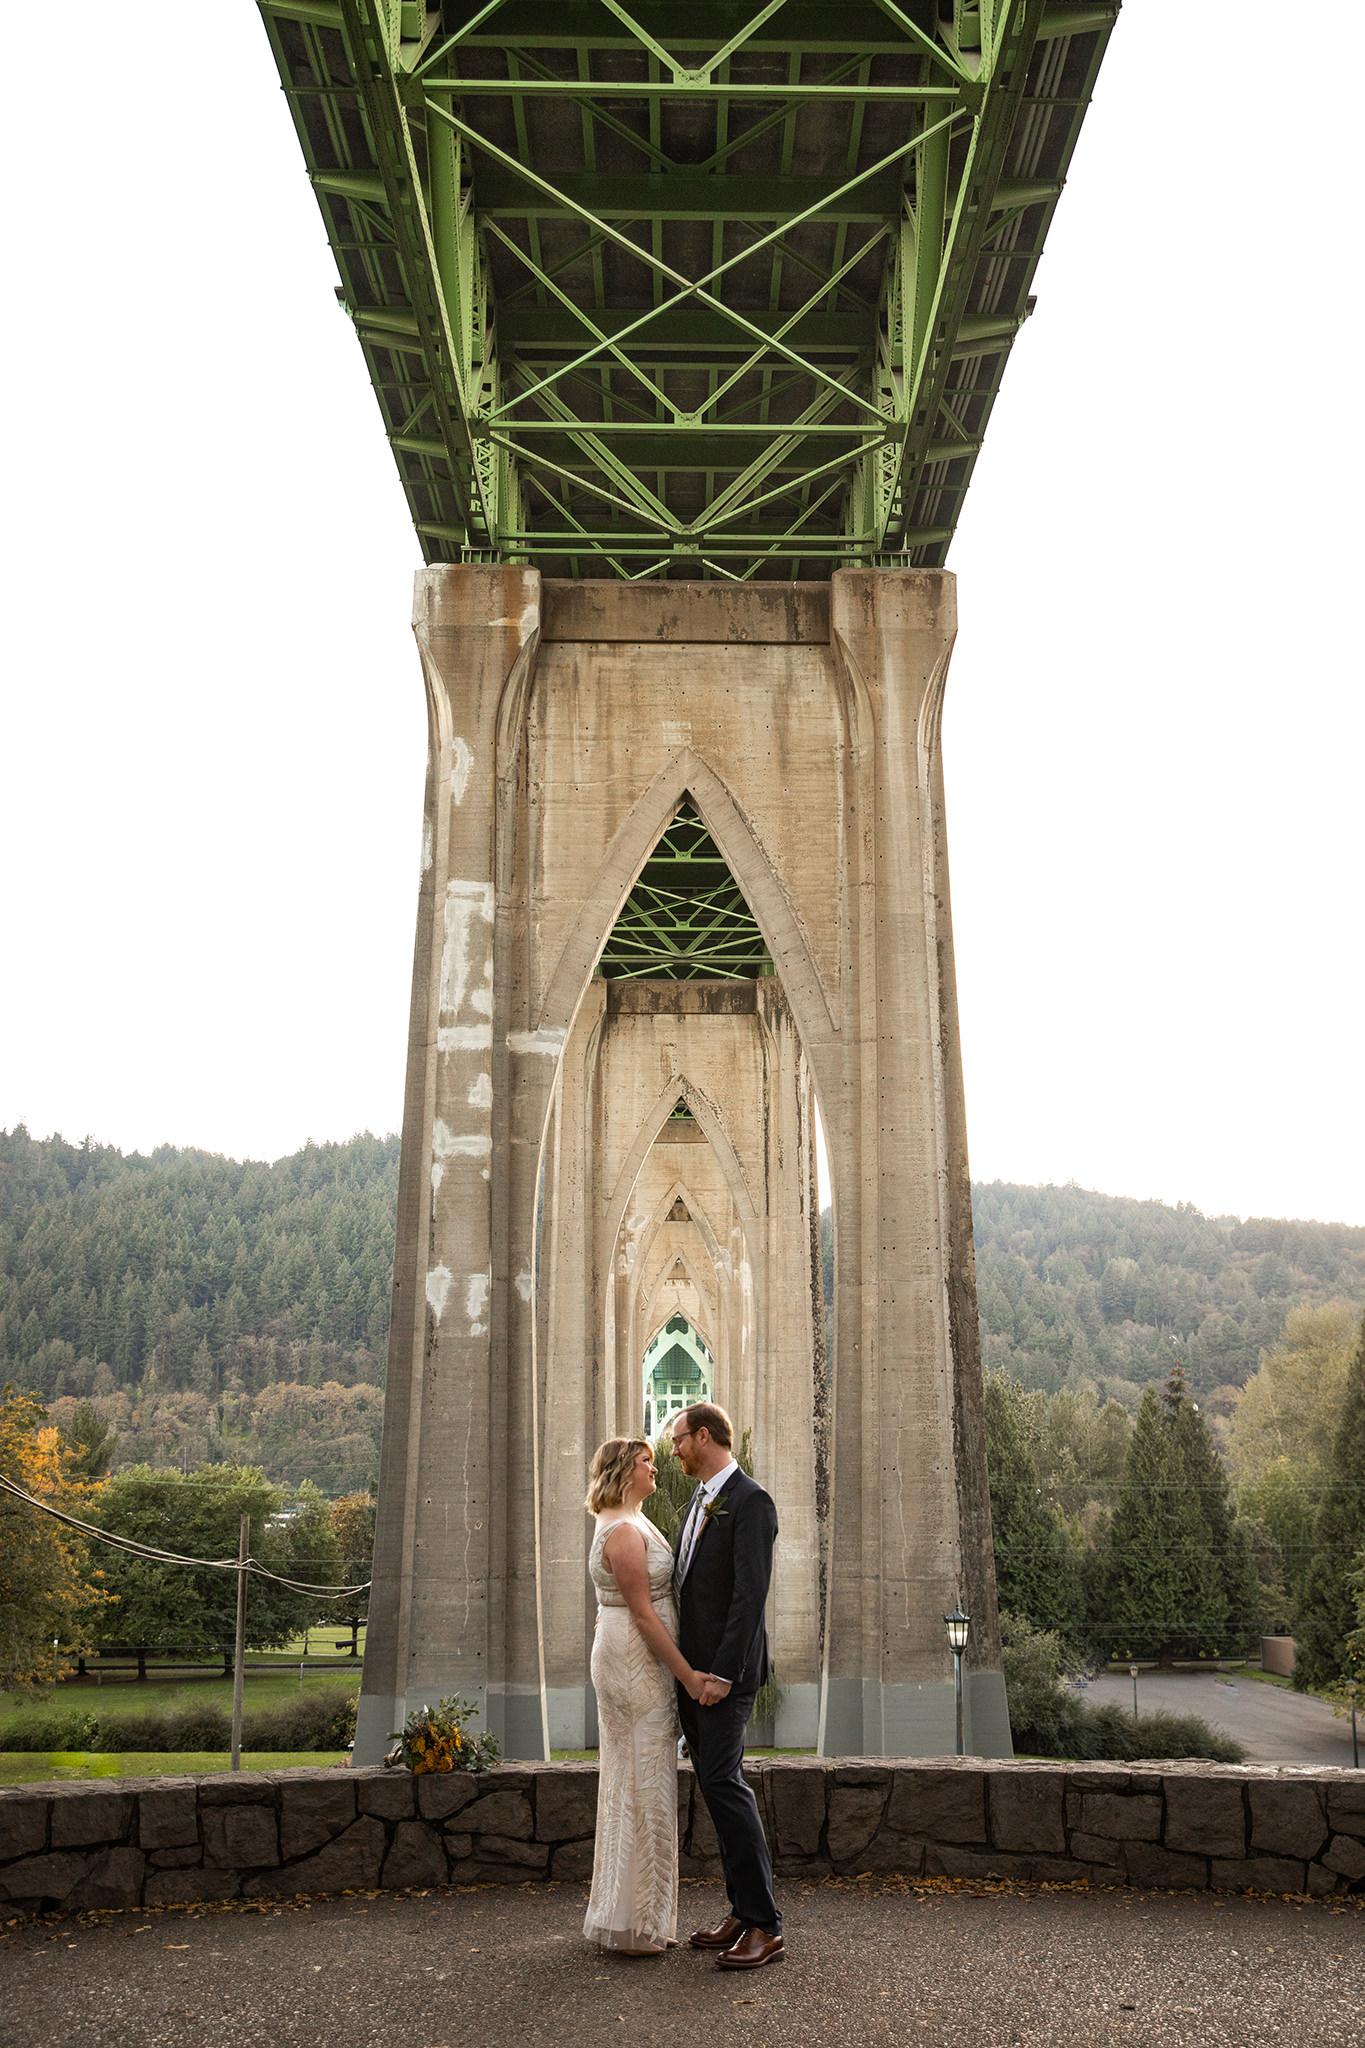 A wedding photo beneath the St. John's Bridge at Cathedral Park in Portland